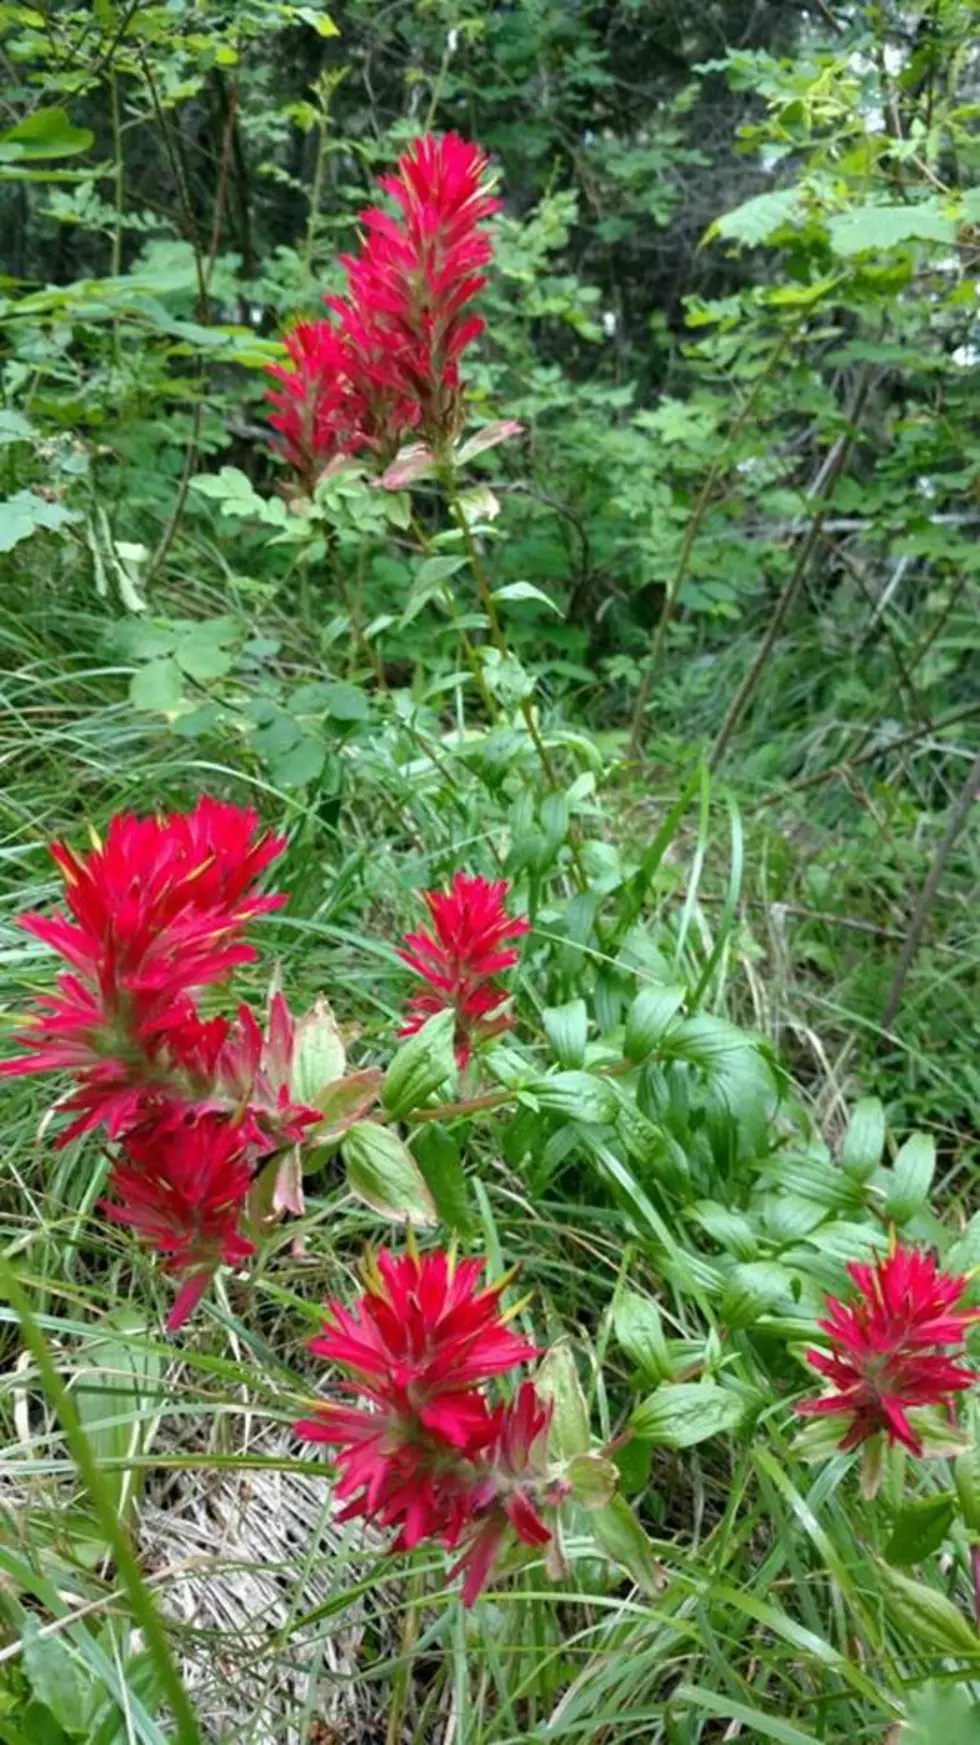 Pictures of Montana Wildflowers, Indian Paintbrush